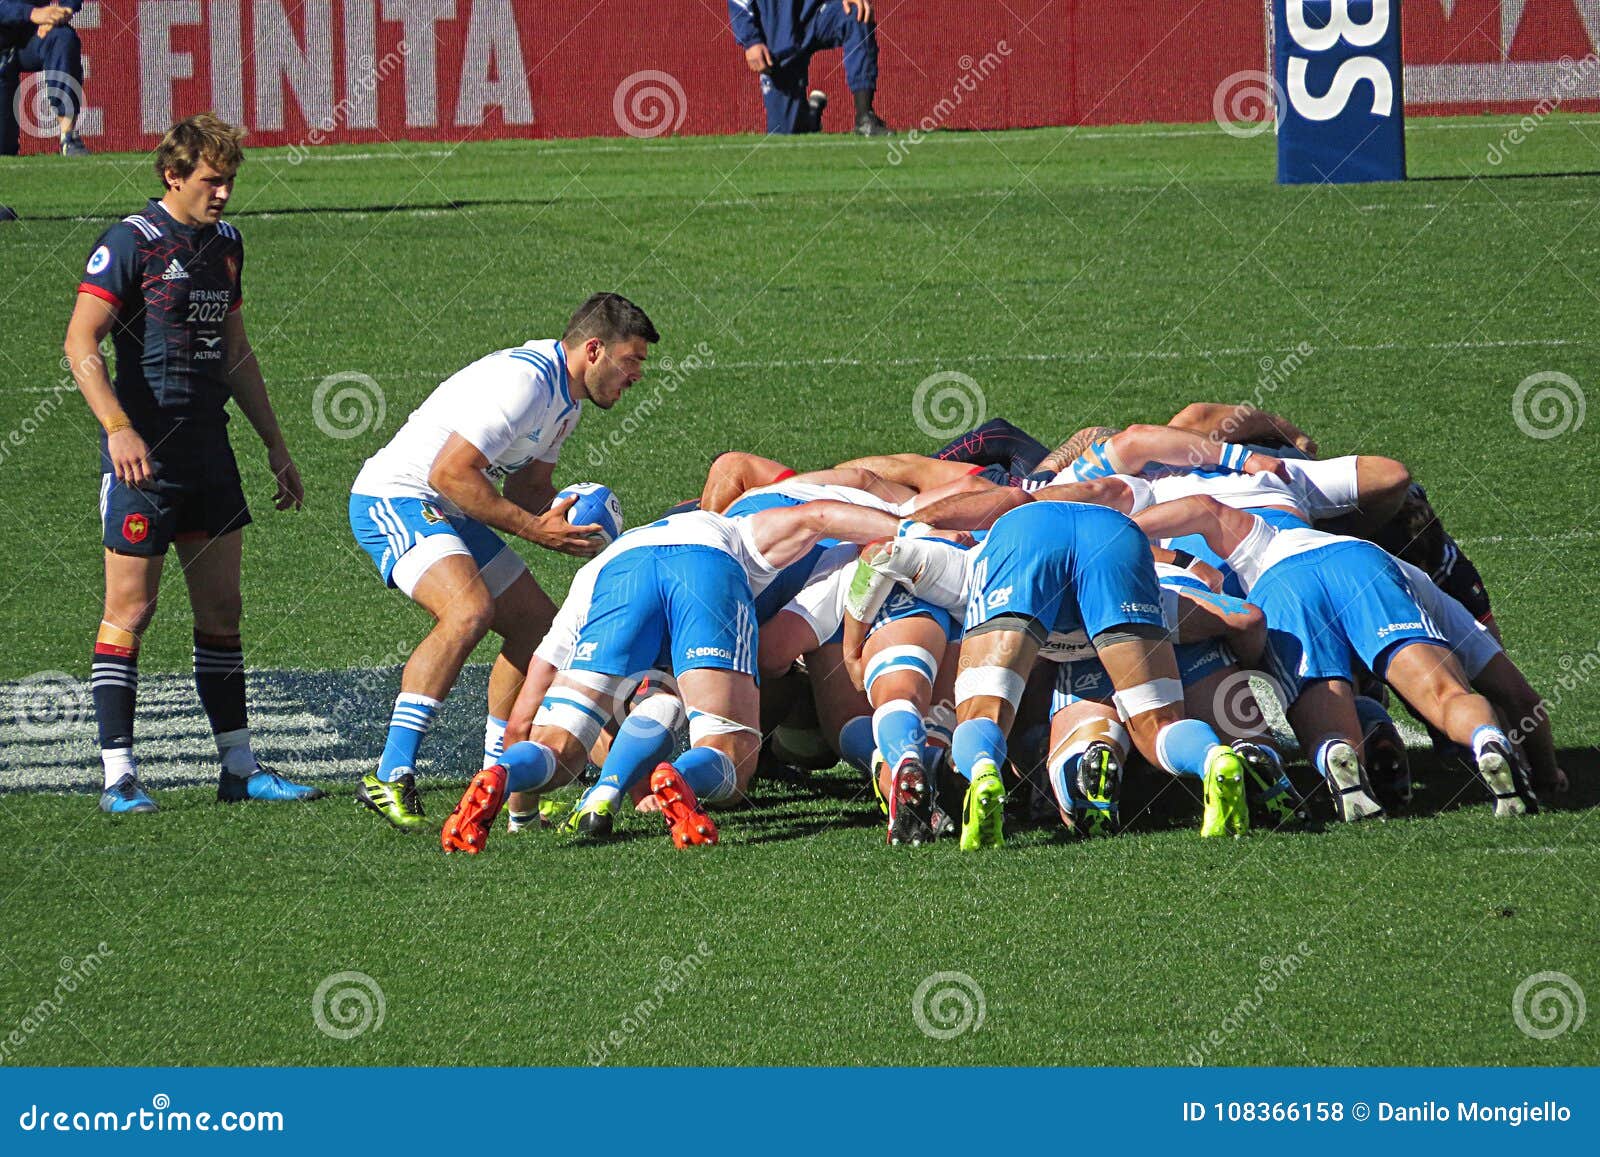 Scrum Rbs Six Nations Rugby Match Italy Vs France Played Rome Scrum Rugby 108366158 